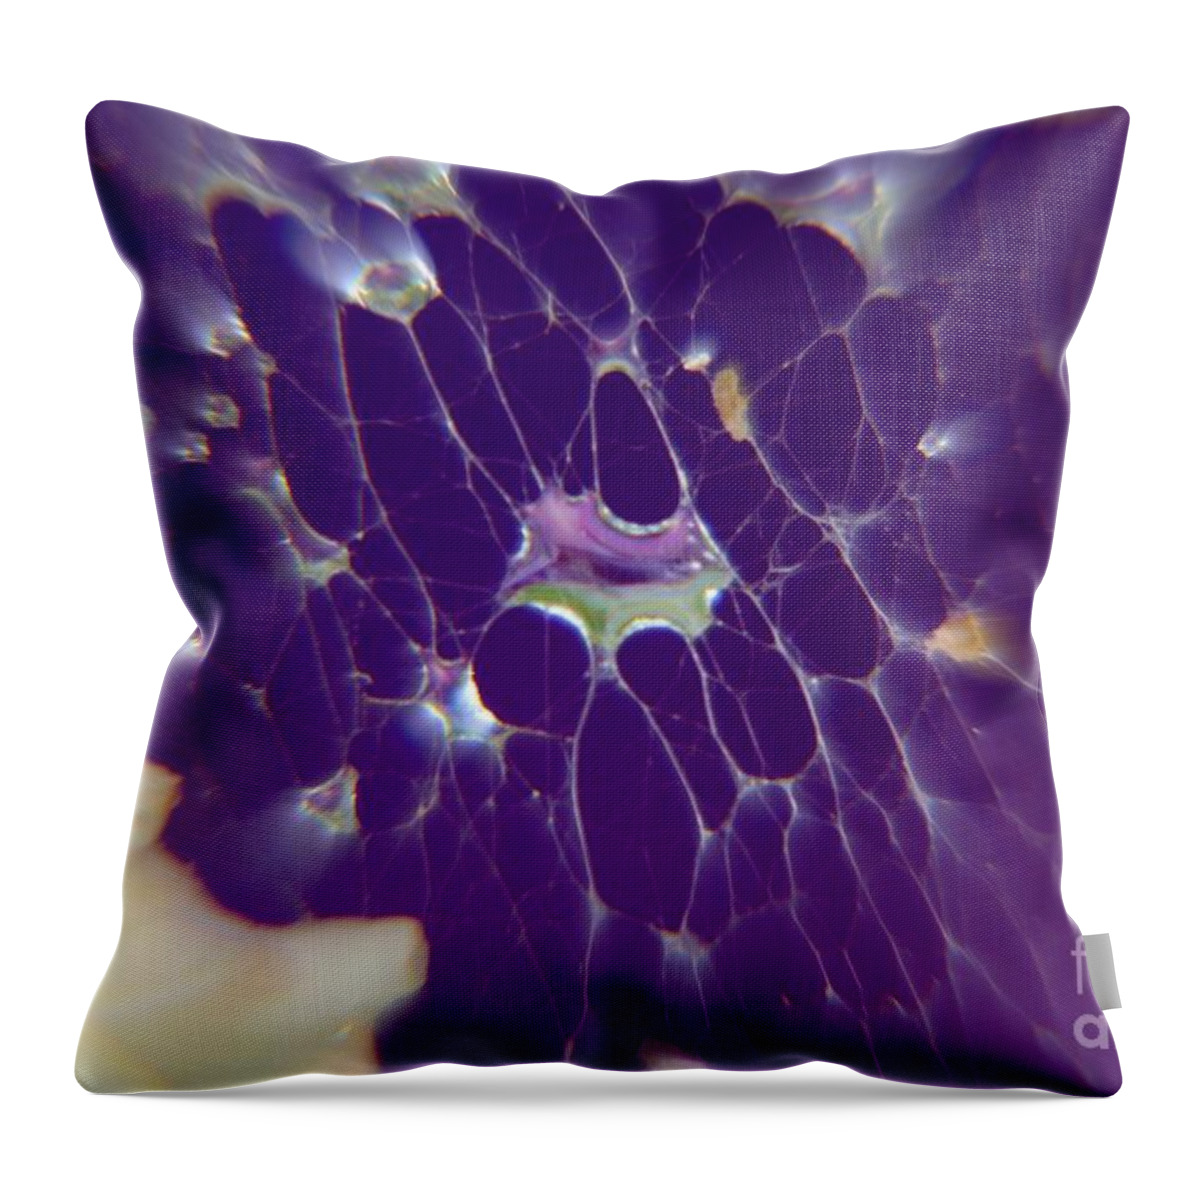 Purples Throw Pillow featuring the photograph Nature Abstract by Yumi Johnson